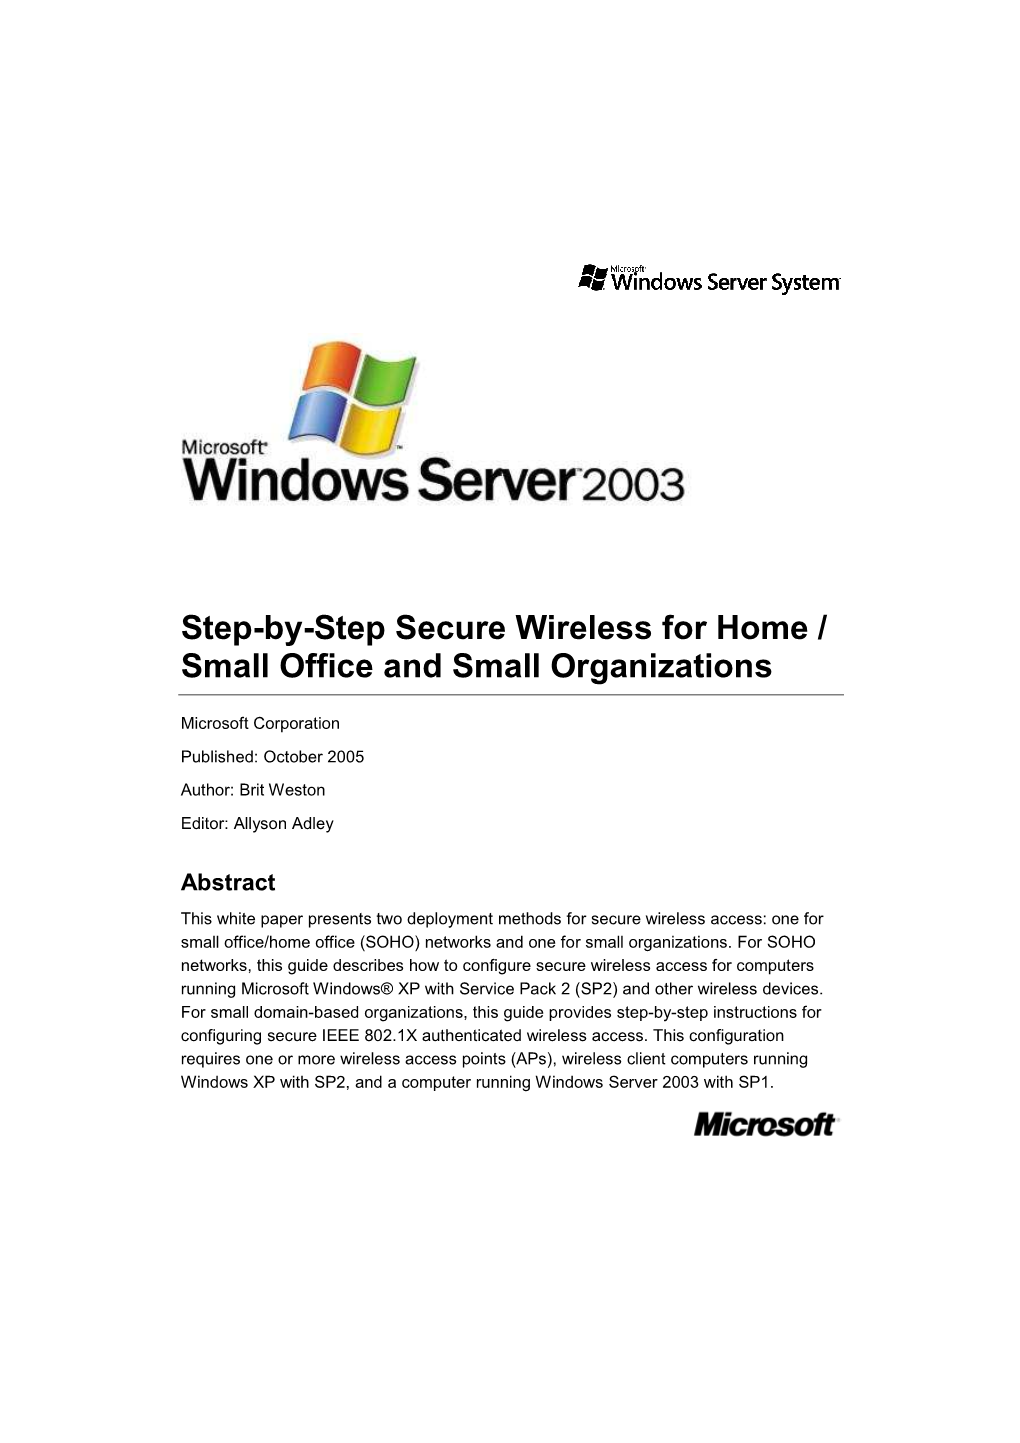 Step-By-Step Secure Wireless for Home / Small Office and Small Organizations